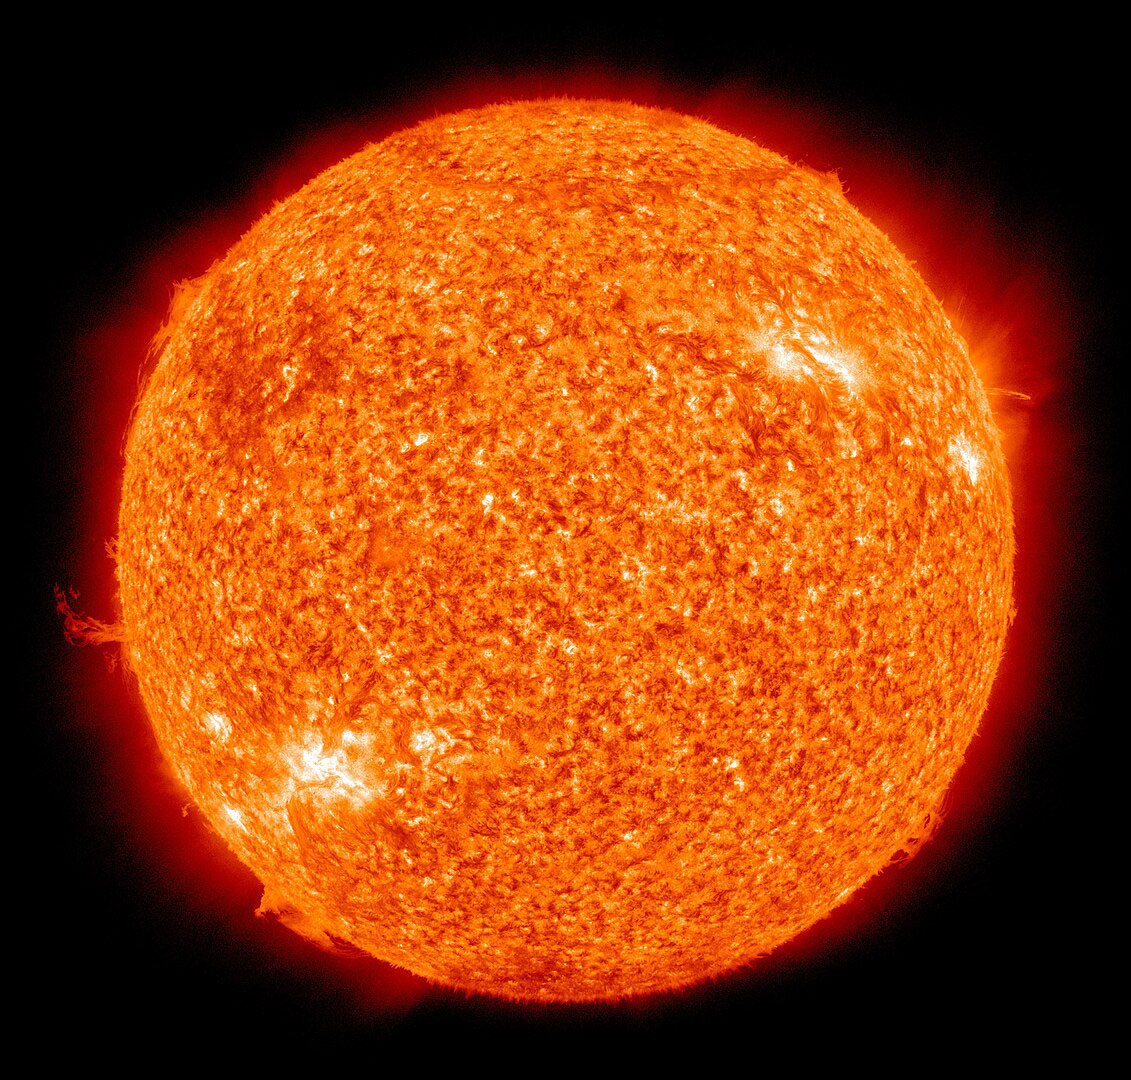 The Sun, doing what the Sun does best: nuclear fusion.